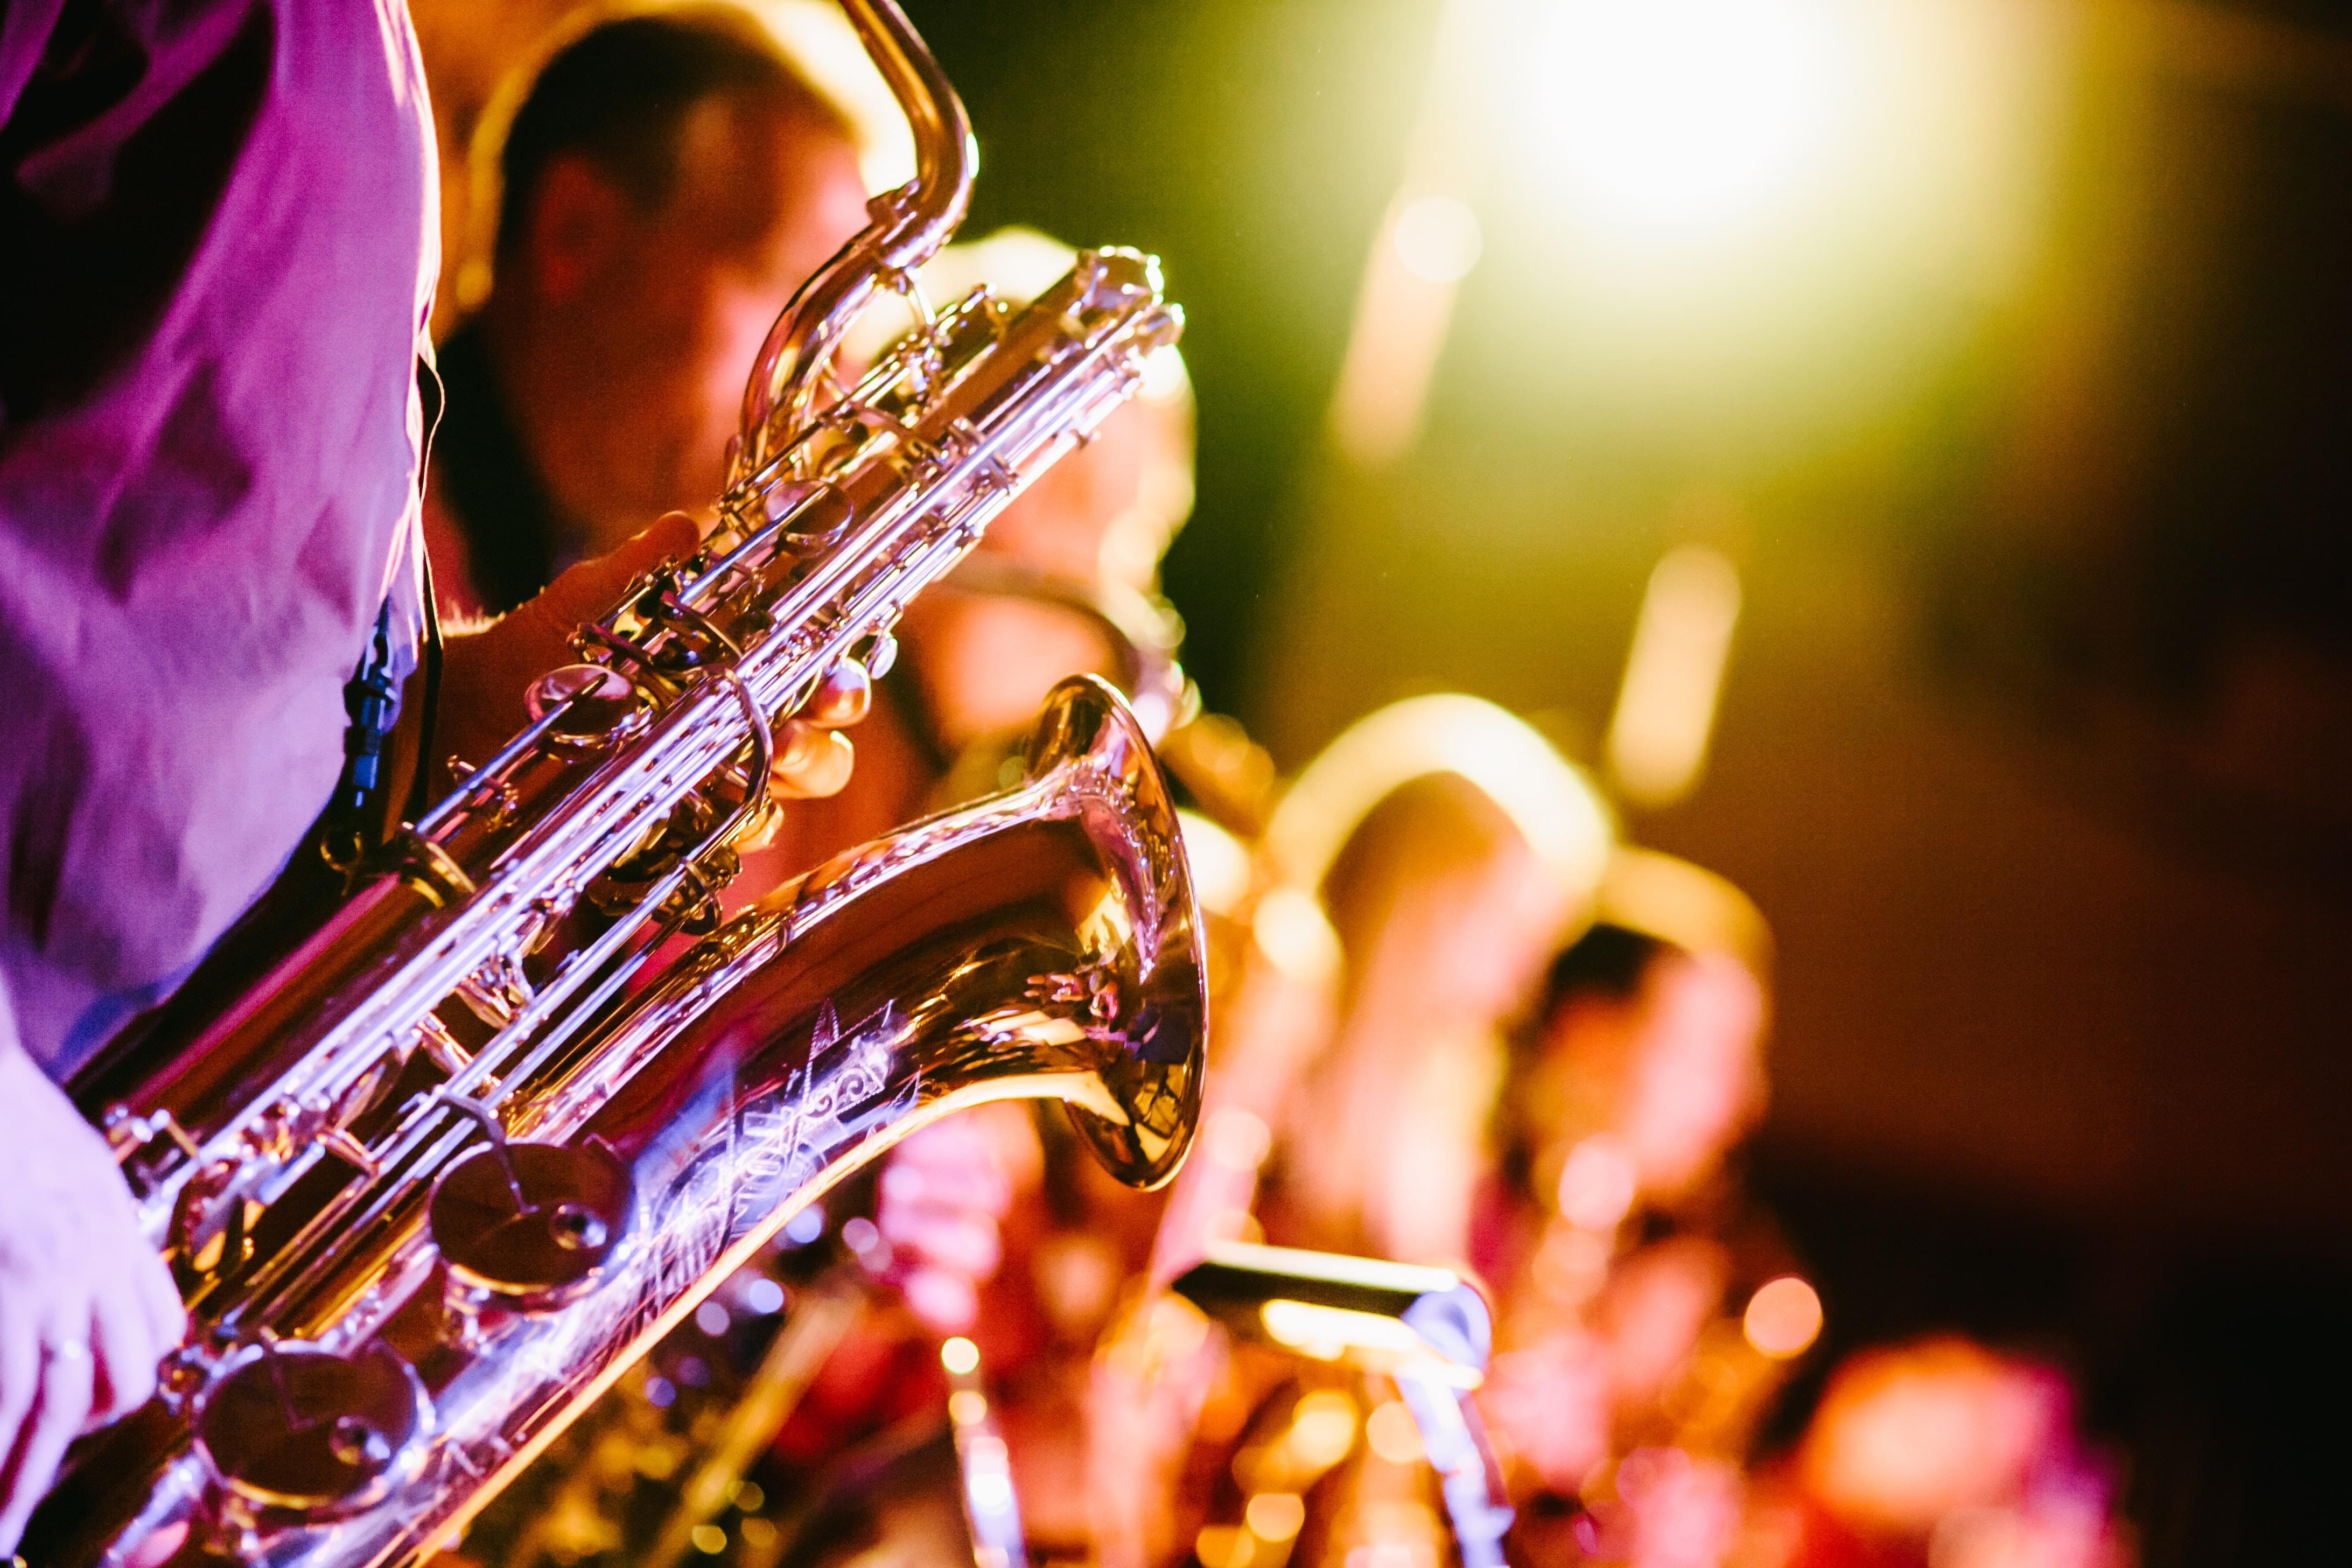 A colorful closeup image of jazz musicians and a saxophone